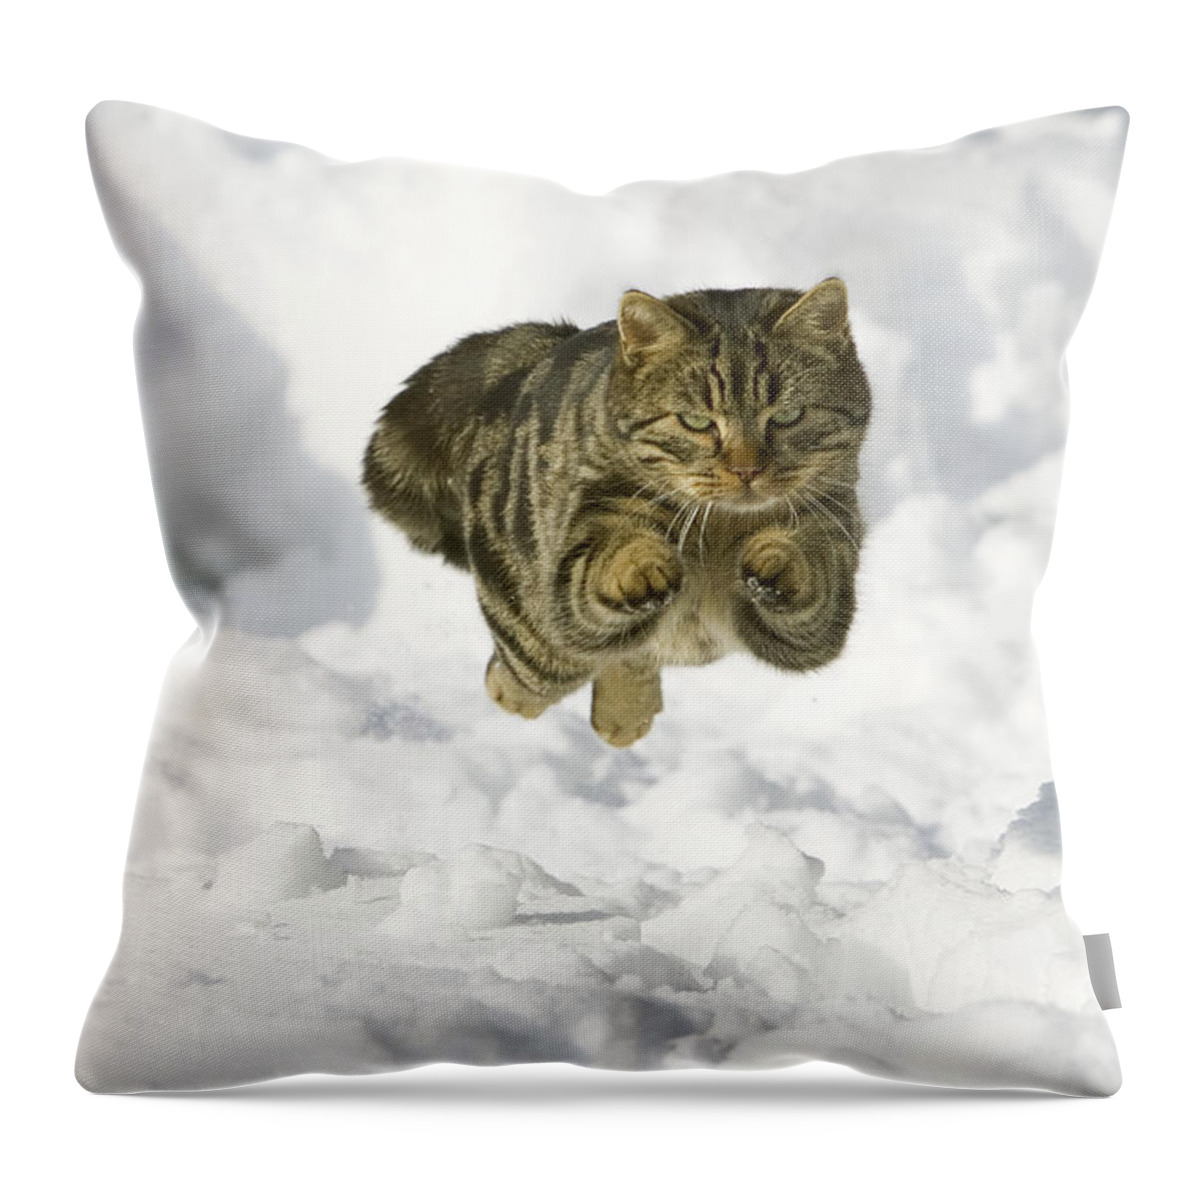 Feb0514 Throw Pillow featuring the photograph House Cat Male Jumping In Snow Germany by Konrad Wothe